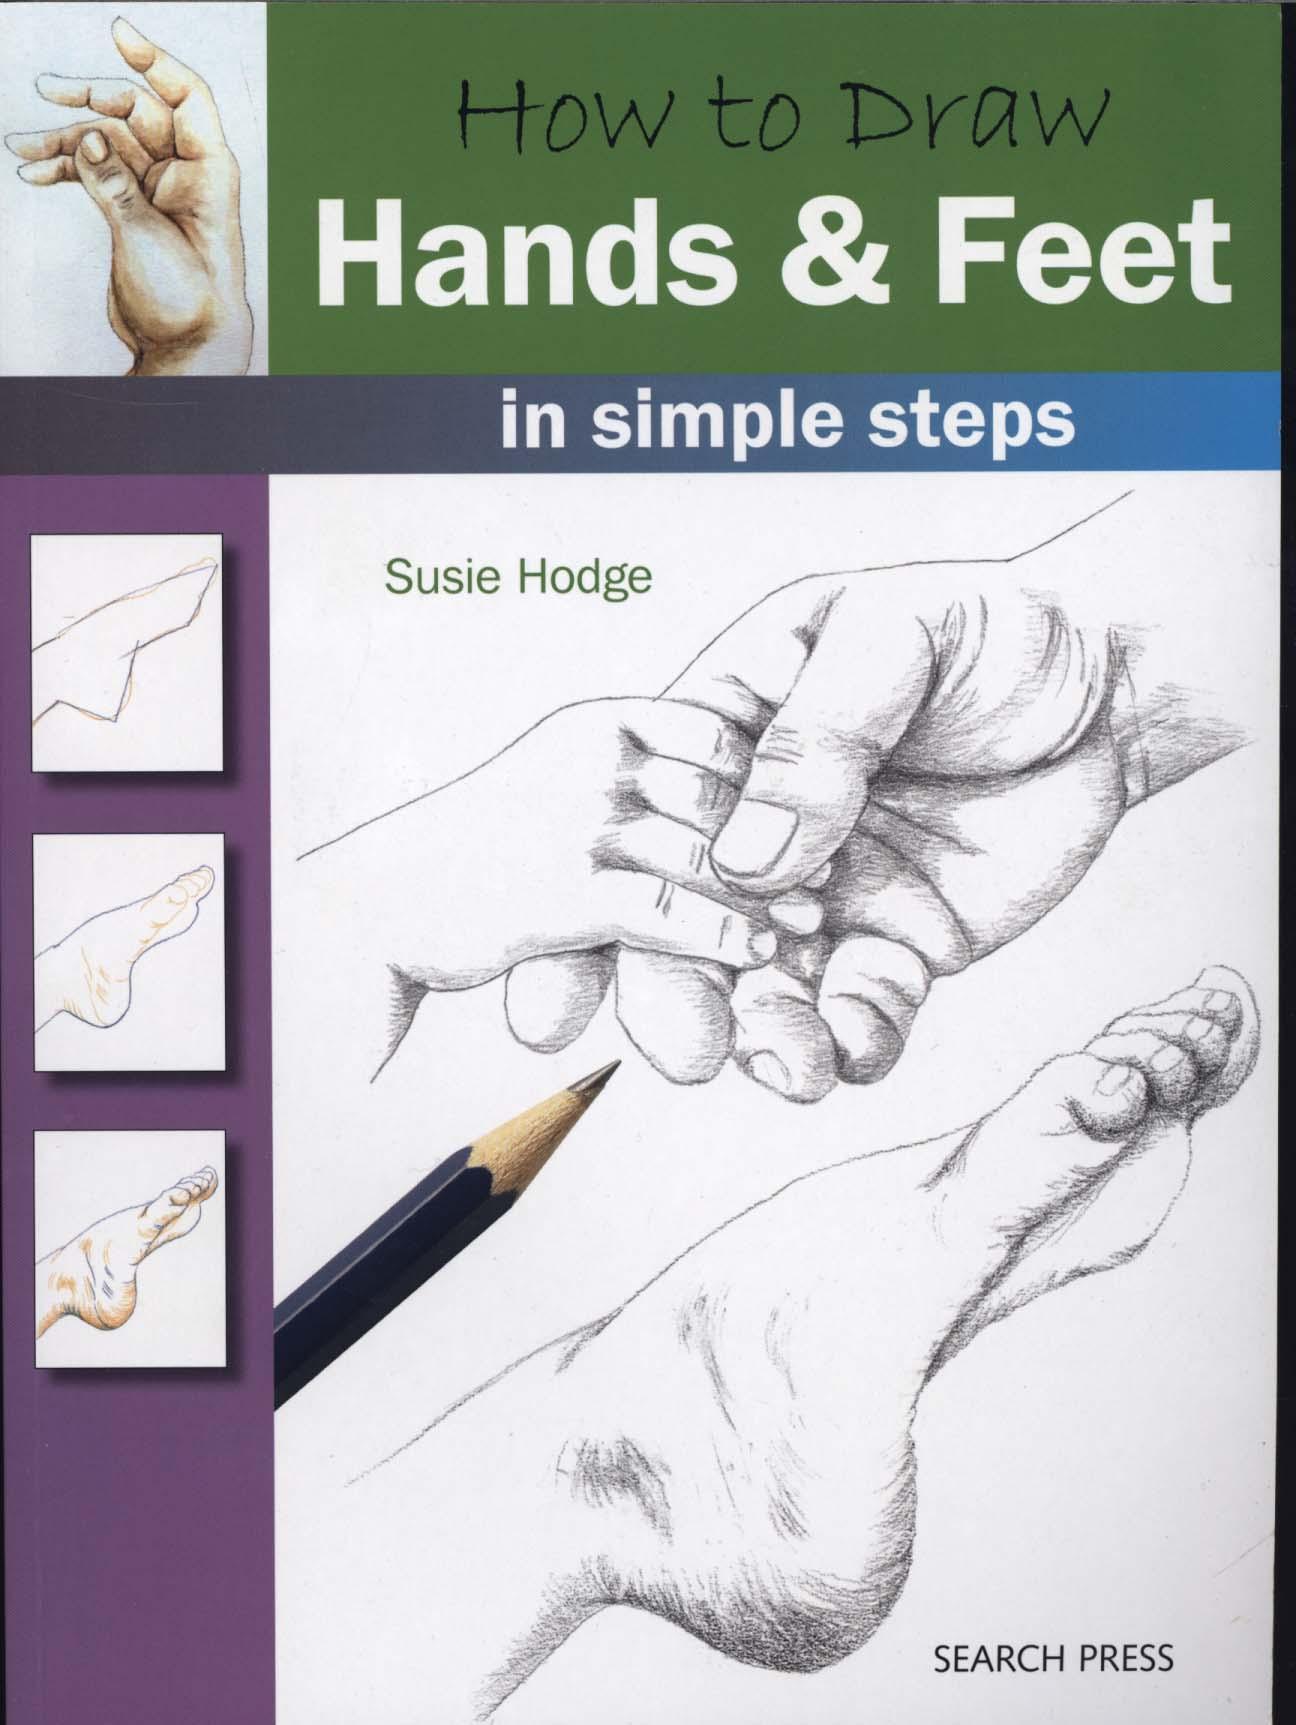 How to Draw: Hands & Feet